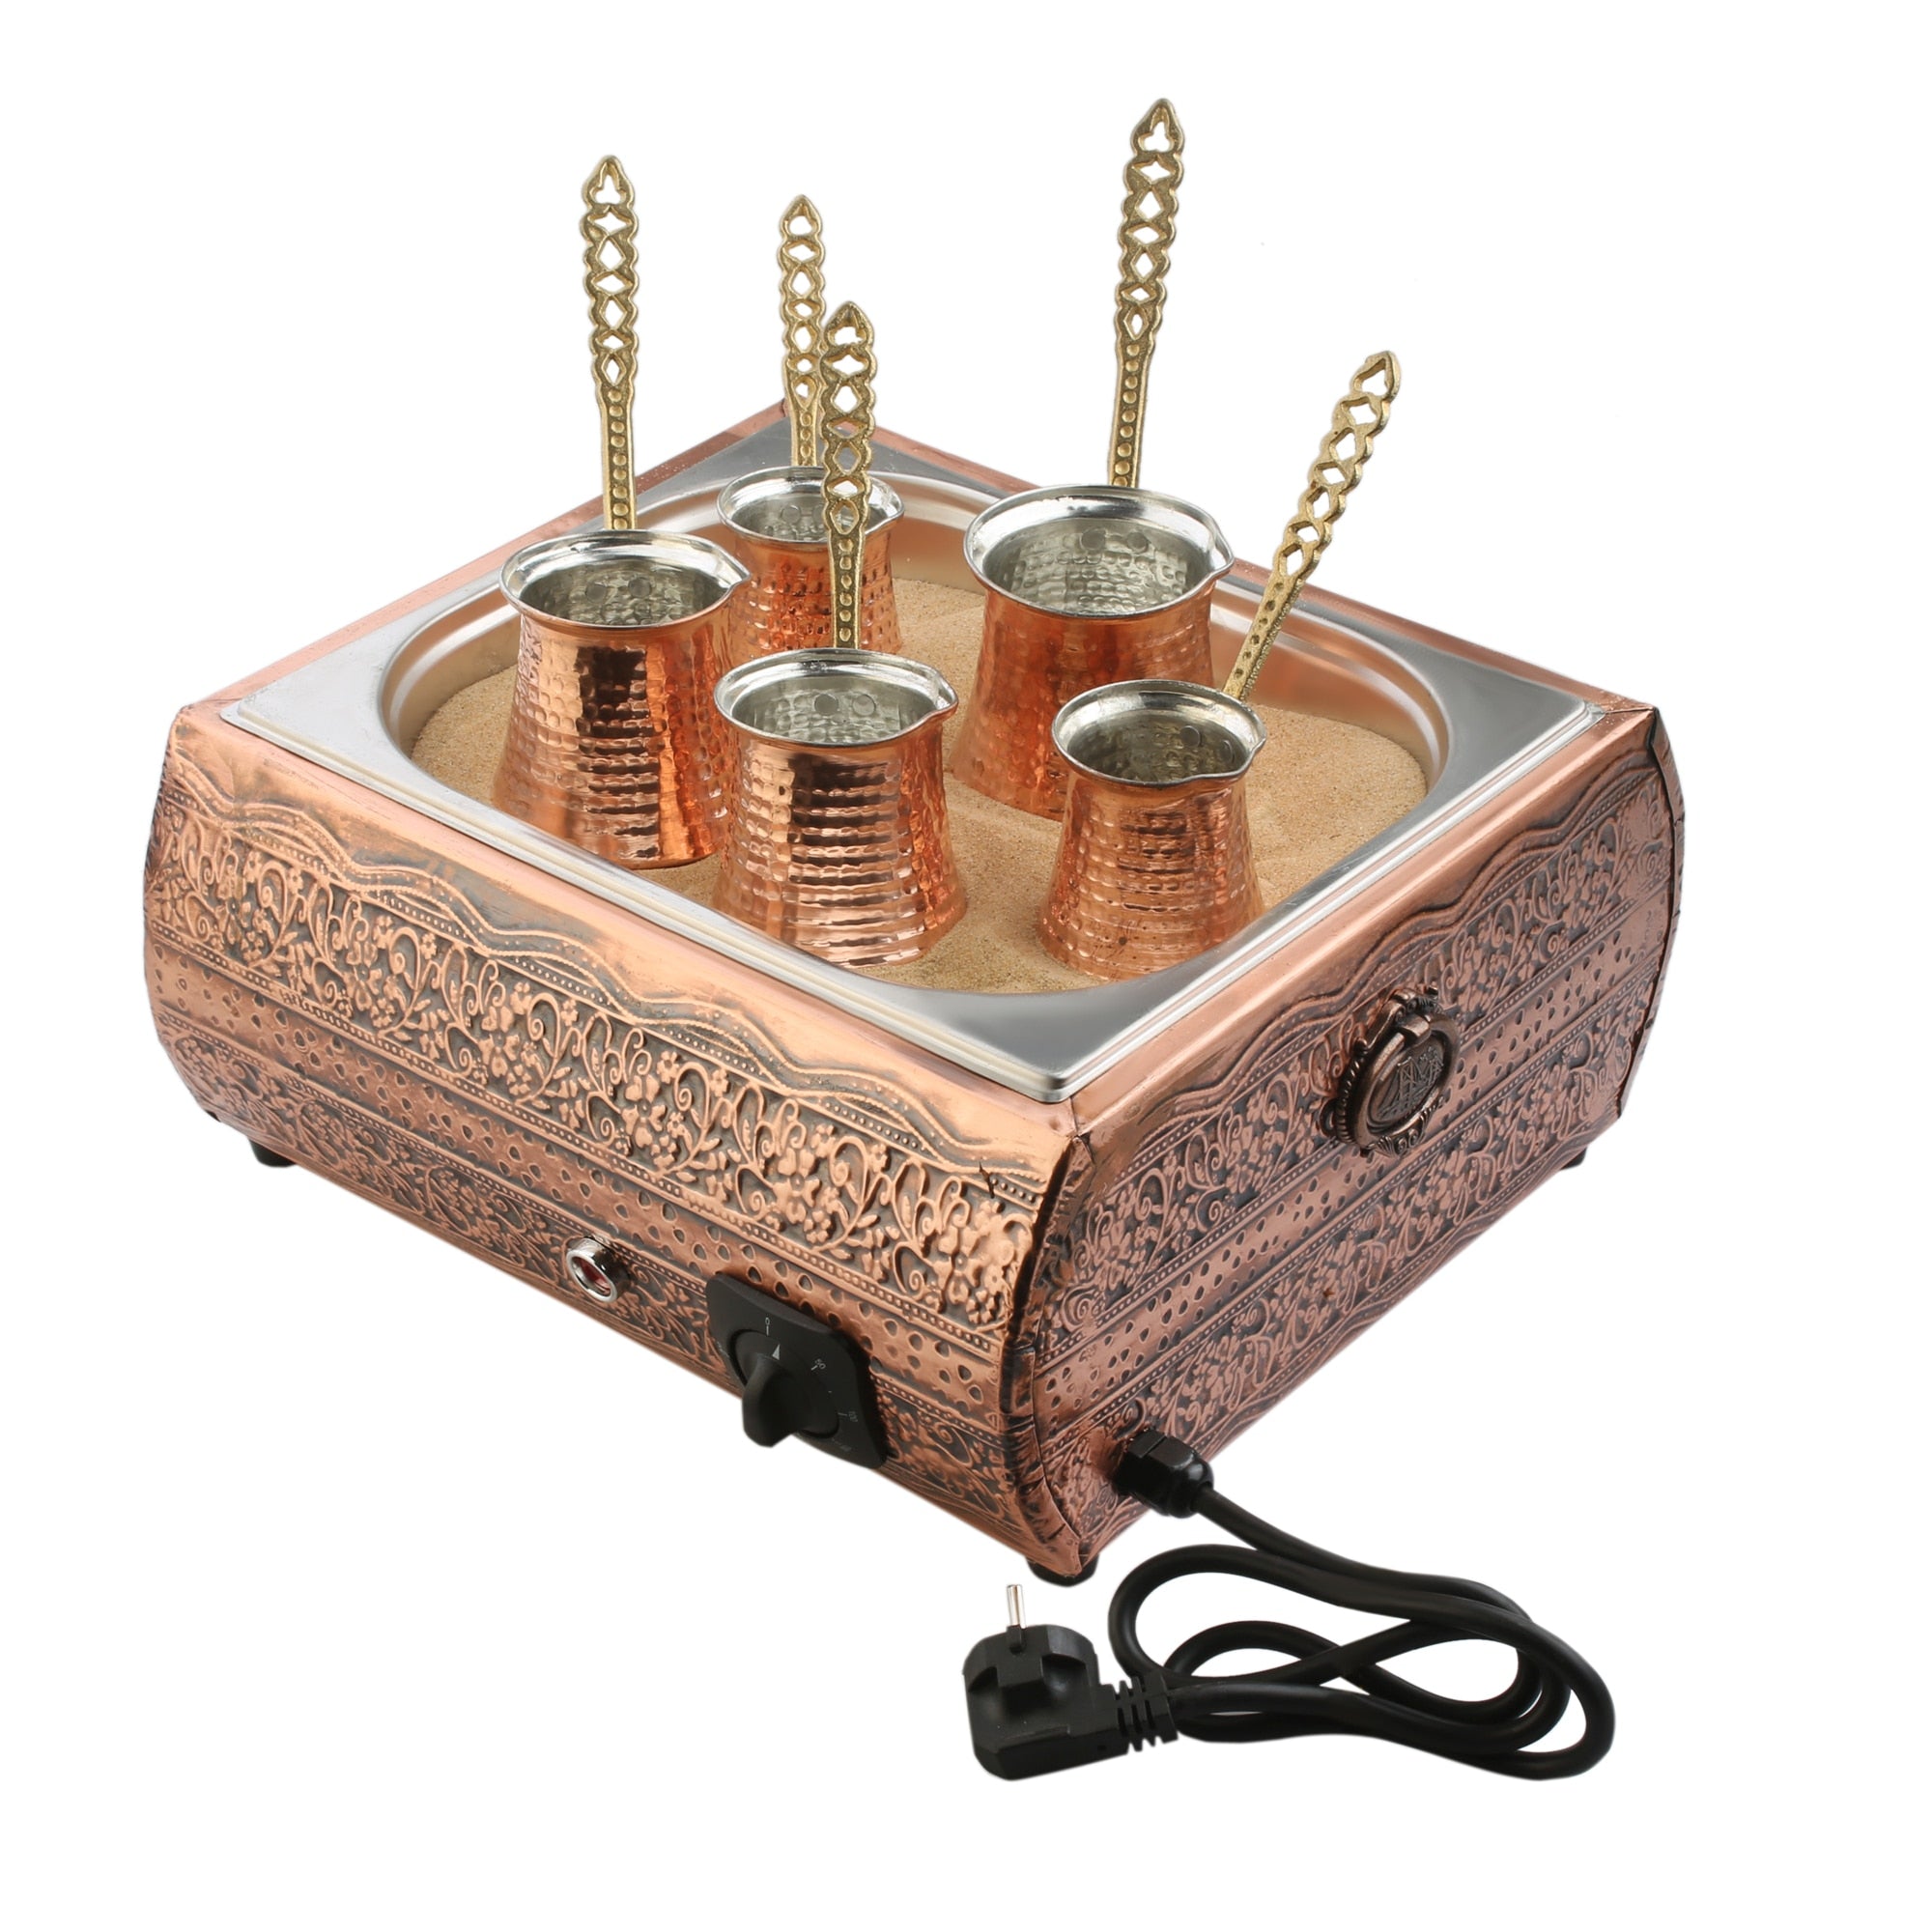 Authentic Turkish Copper Electric Hot Sand Coffee Maker Heater Machine 110V-220V and 5 Size Turkish Coffee Pot